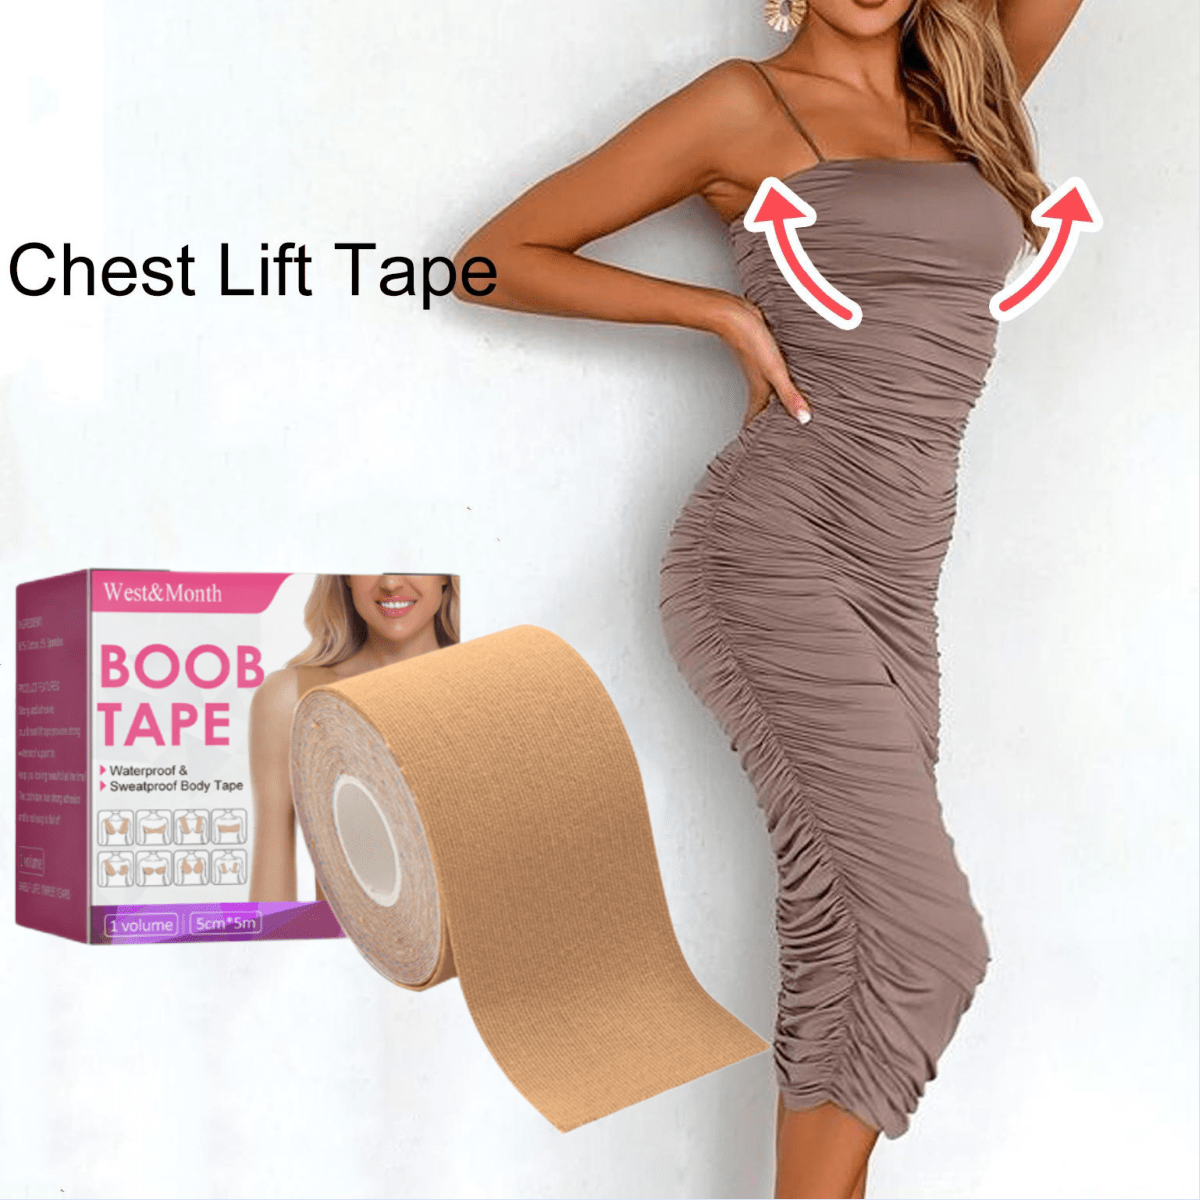 Boob Tape For Breast Lift, Achieve Chest Brace Lift & Contour Of Breasts,  Sticky Body Tape For Push Up & Shape In All Clothing Fabric Dress Types, Wat